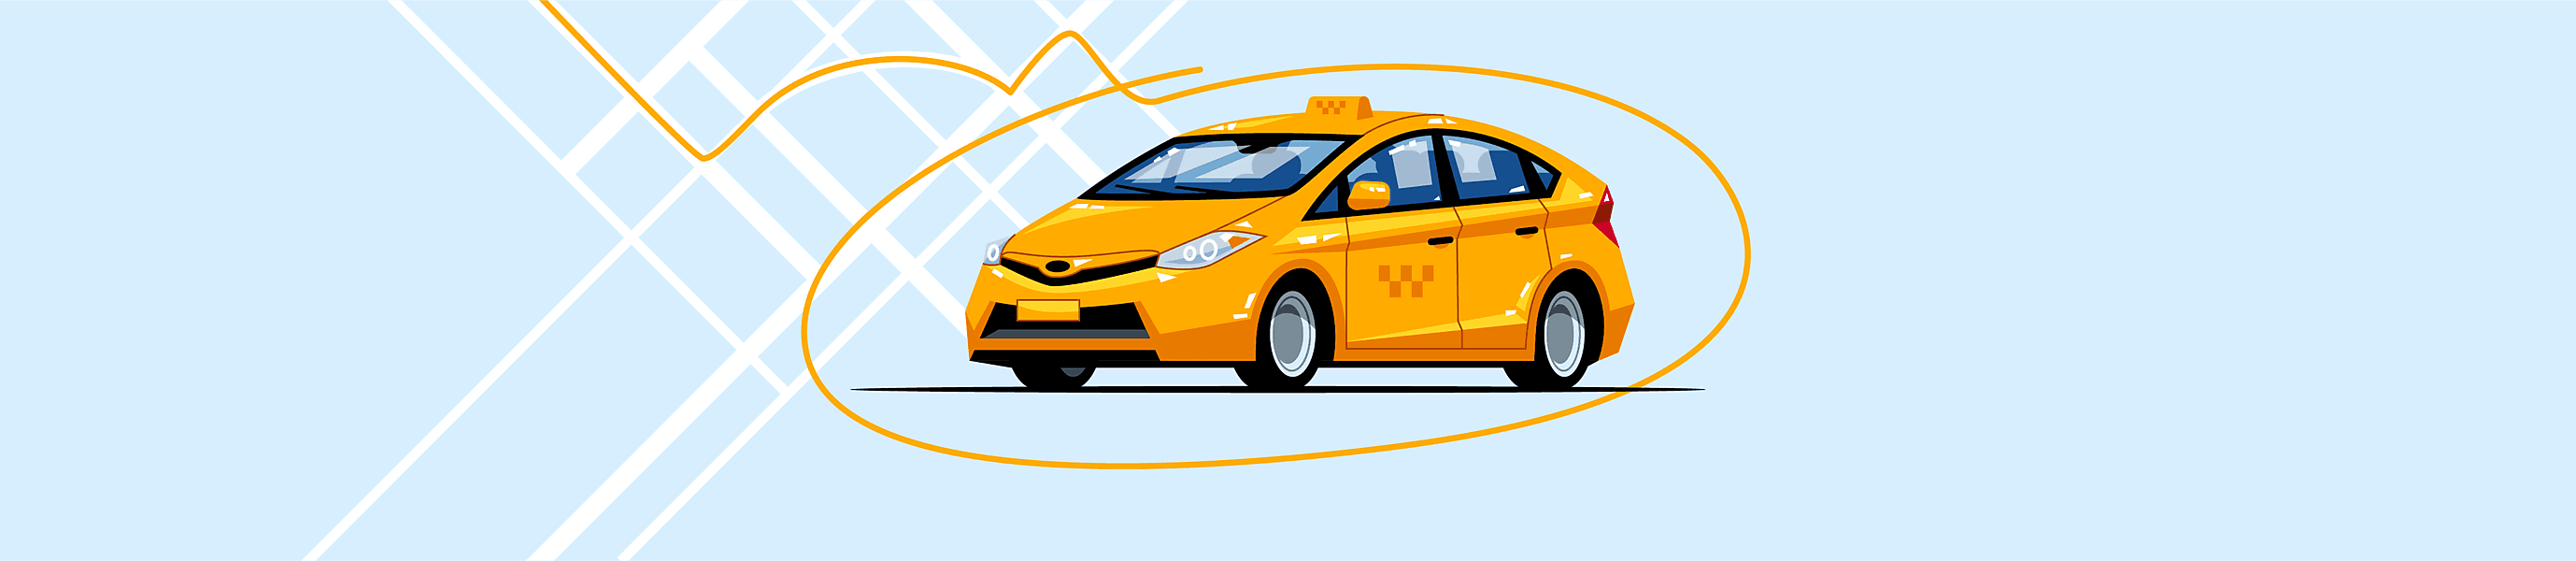 Step-by-Step Guide on Taxi App Development: Features And Business Model